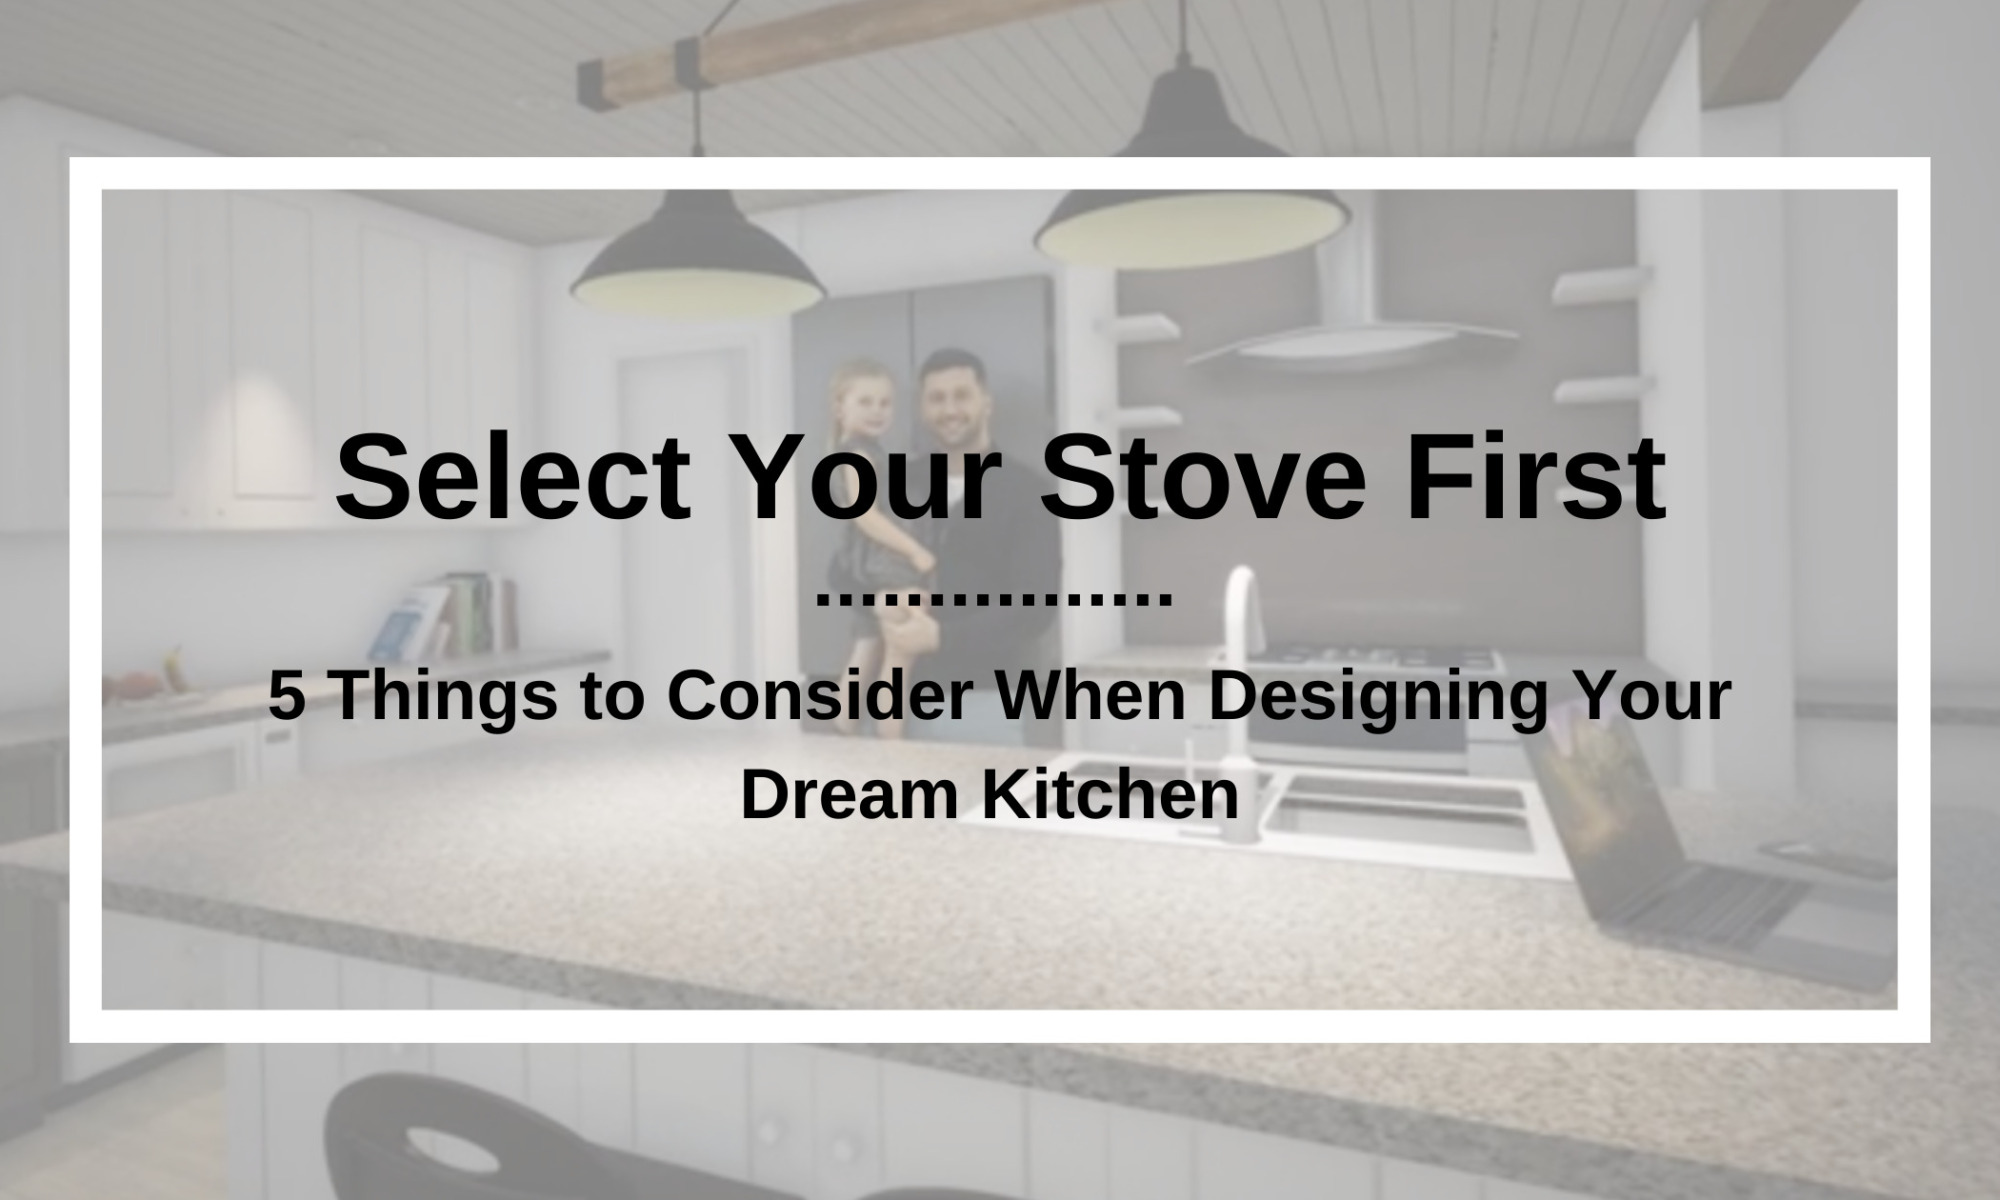 Kitchen Image with Caption "Select Your Stove First"